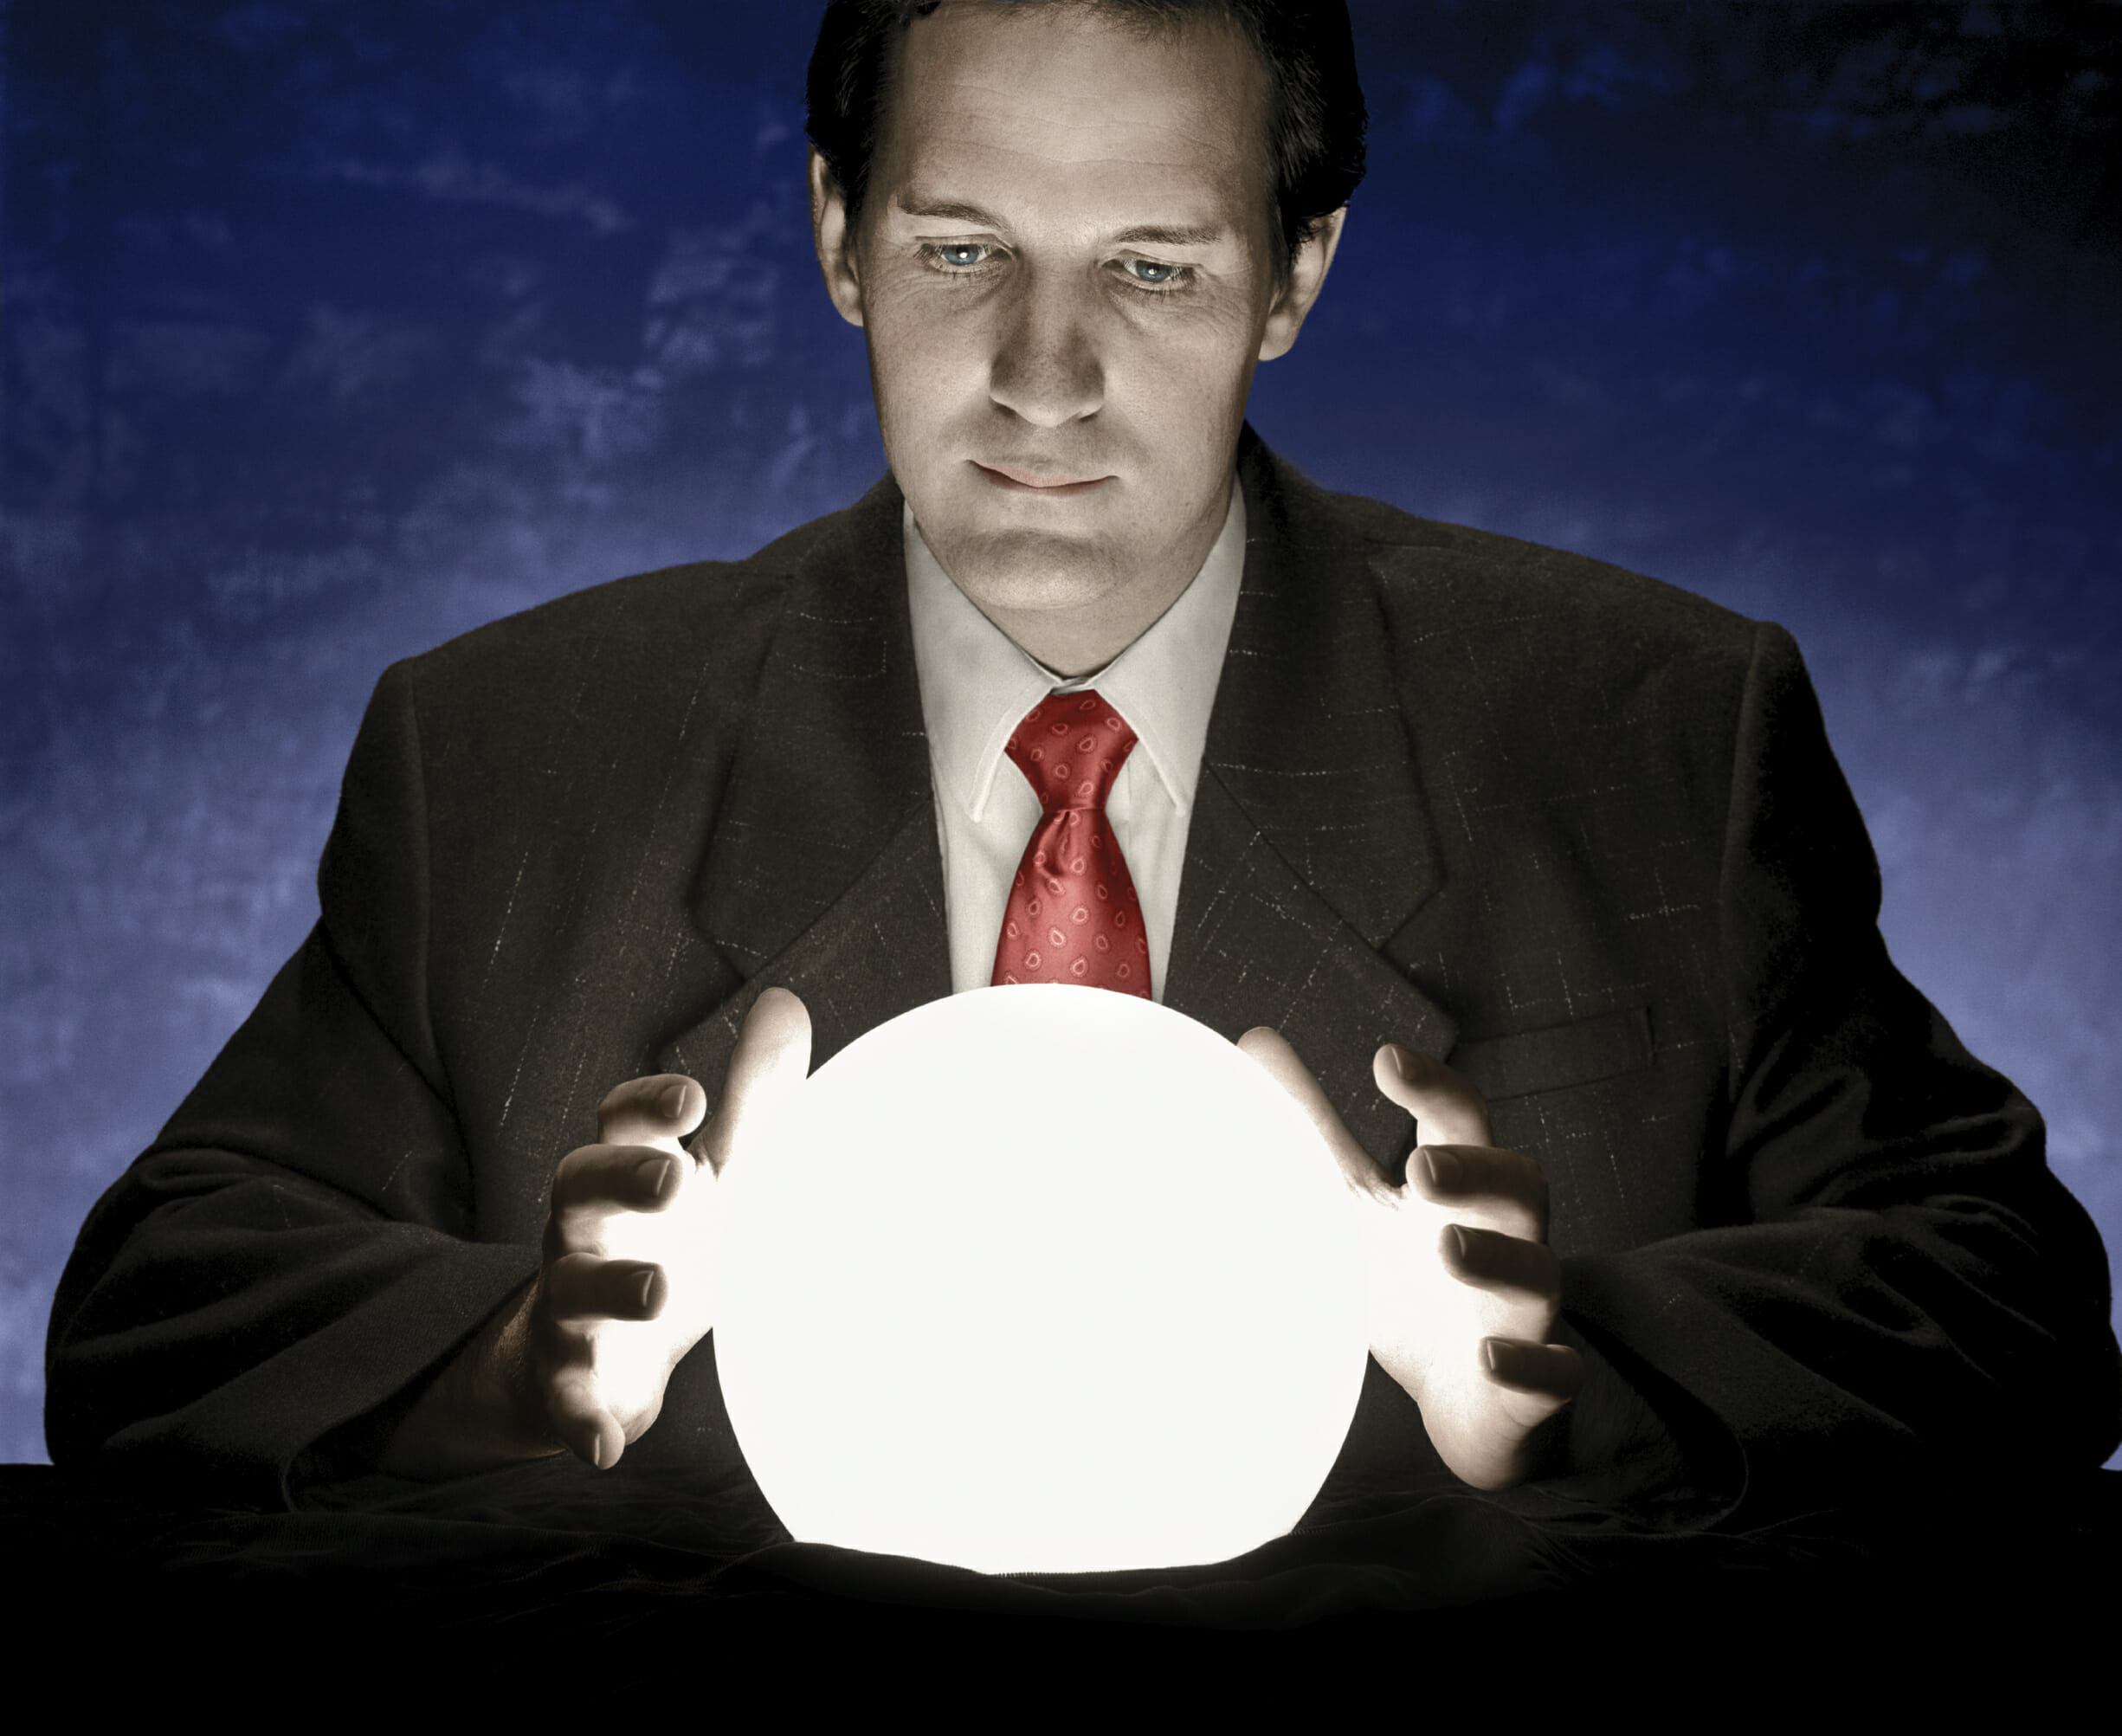 Predicting the Future with a Crystal Ball